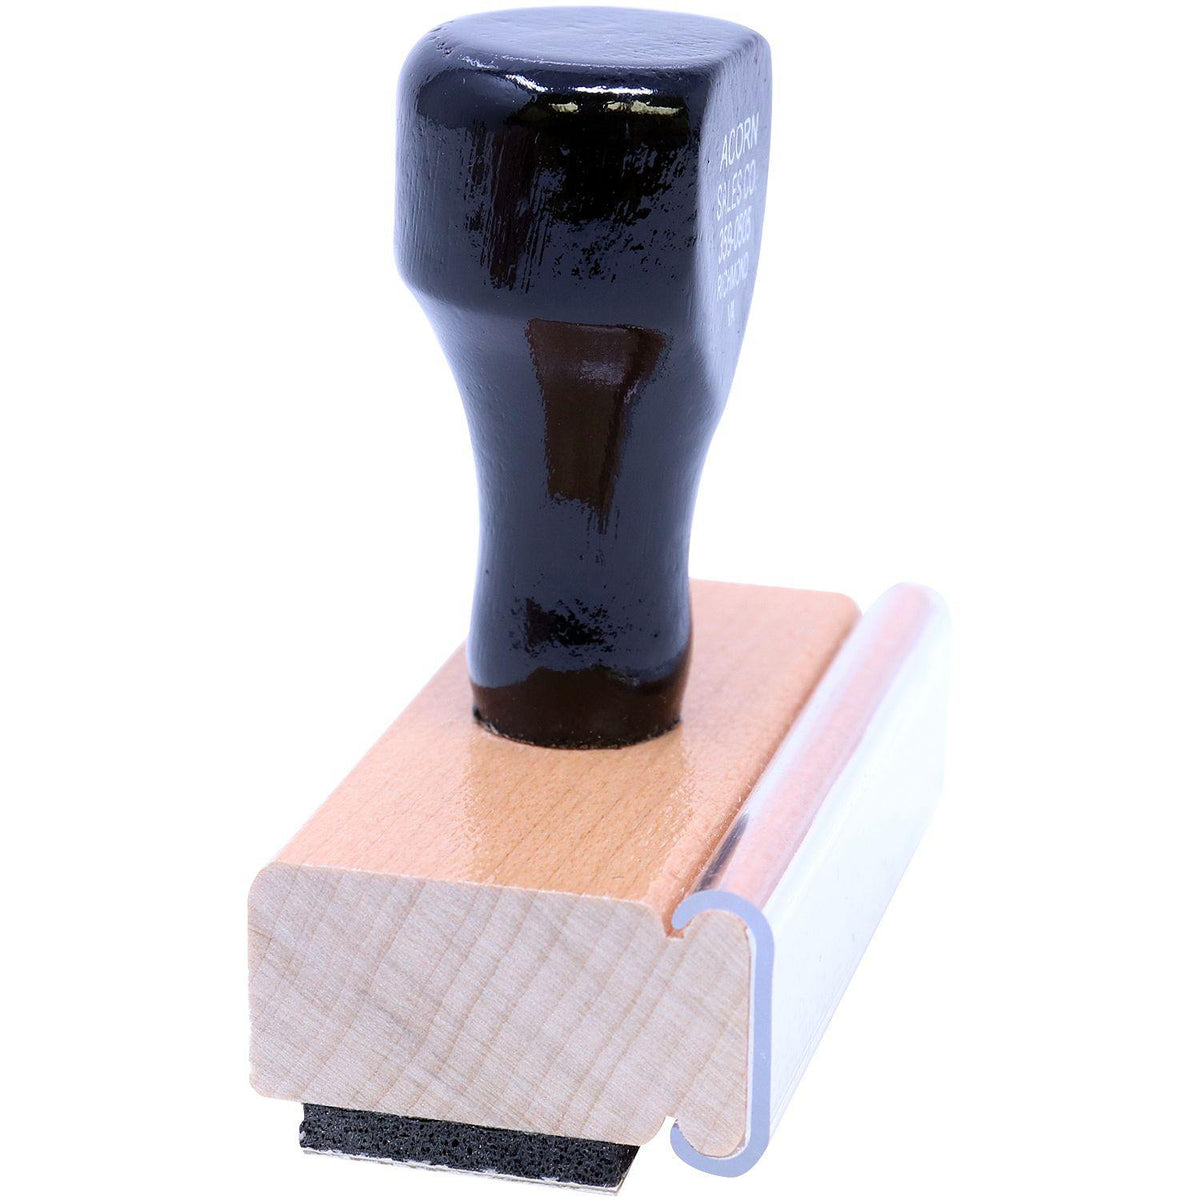 Side View of Bold Admitted Rubber Stamp at an Angle